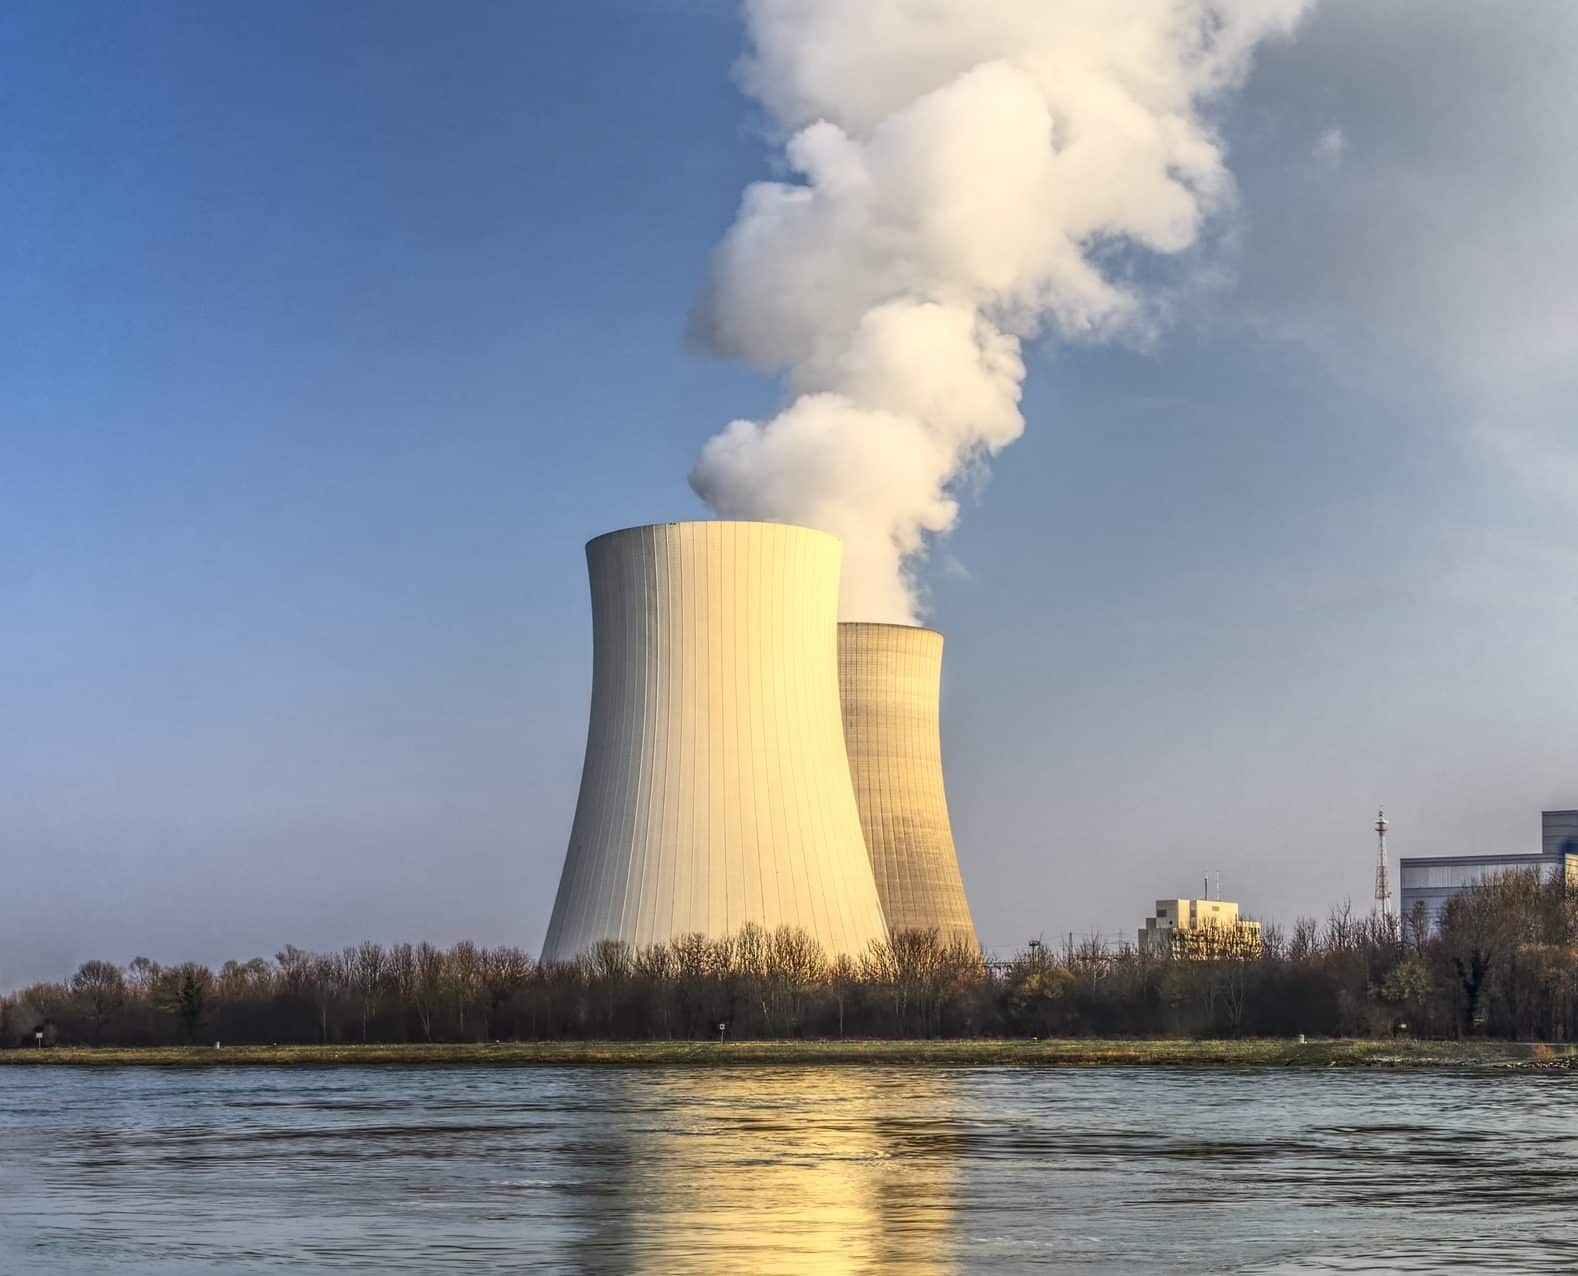 No Radiation Leaks After Fighting at Ukrainian Nuclear Power Plant